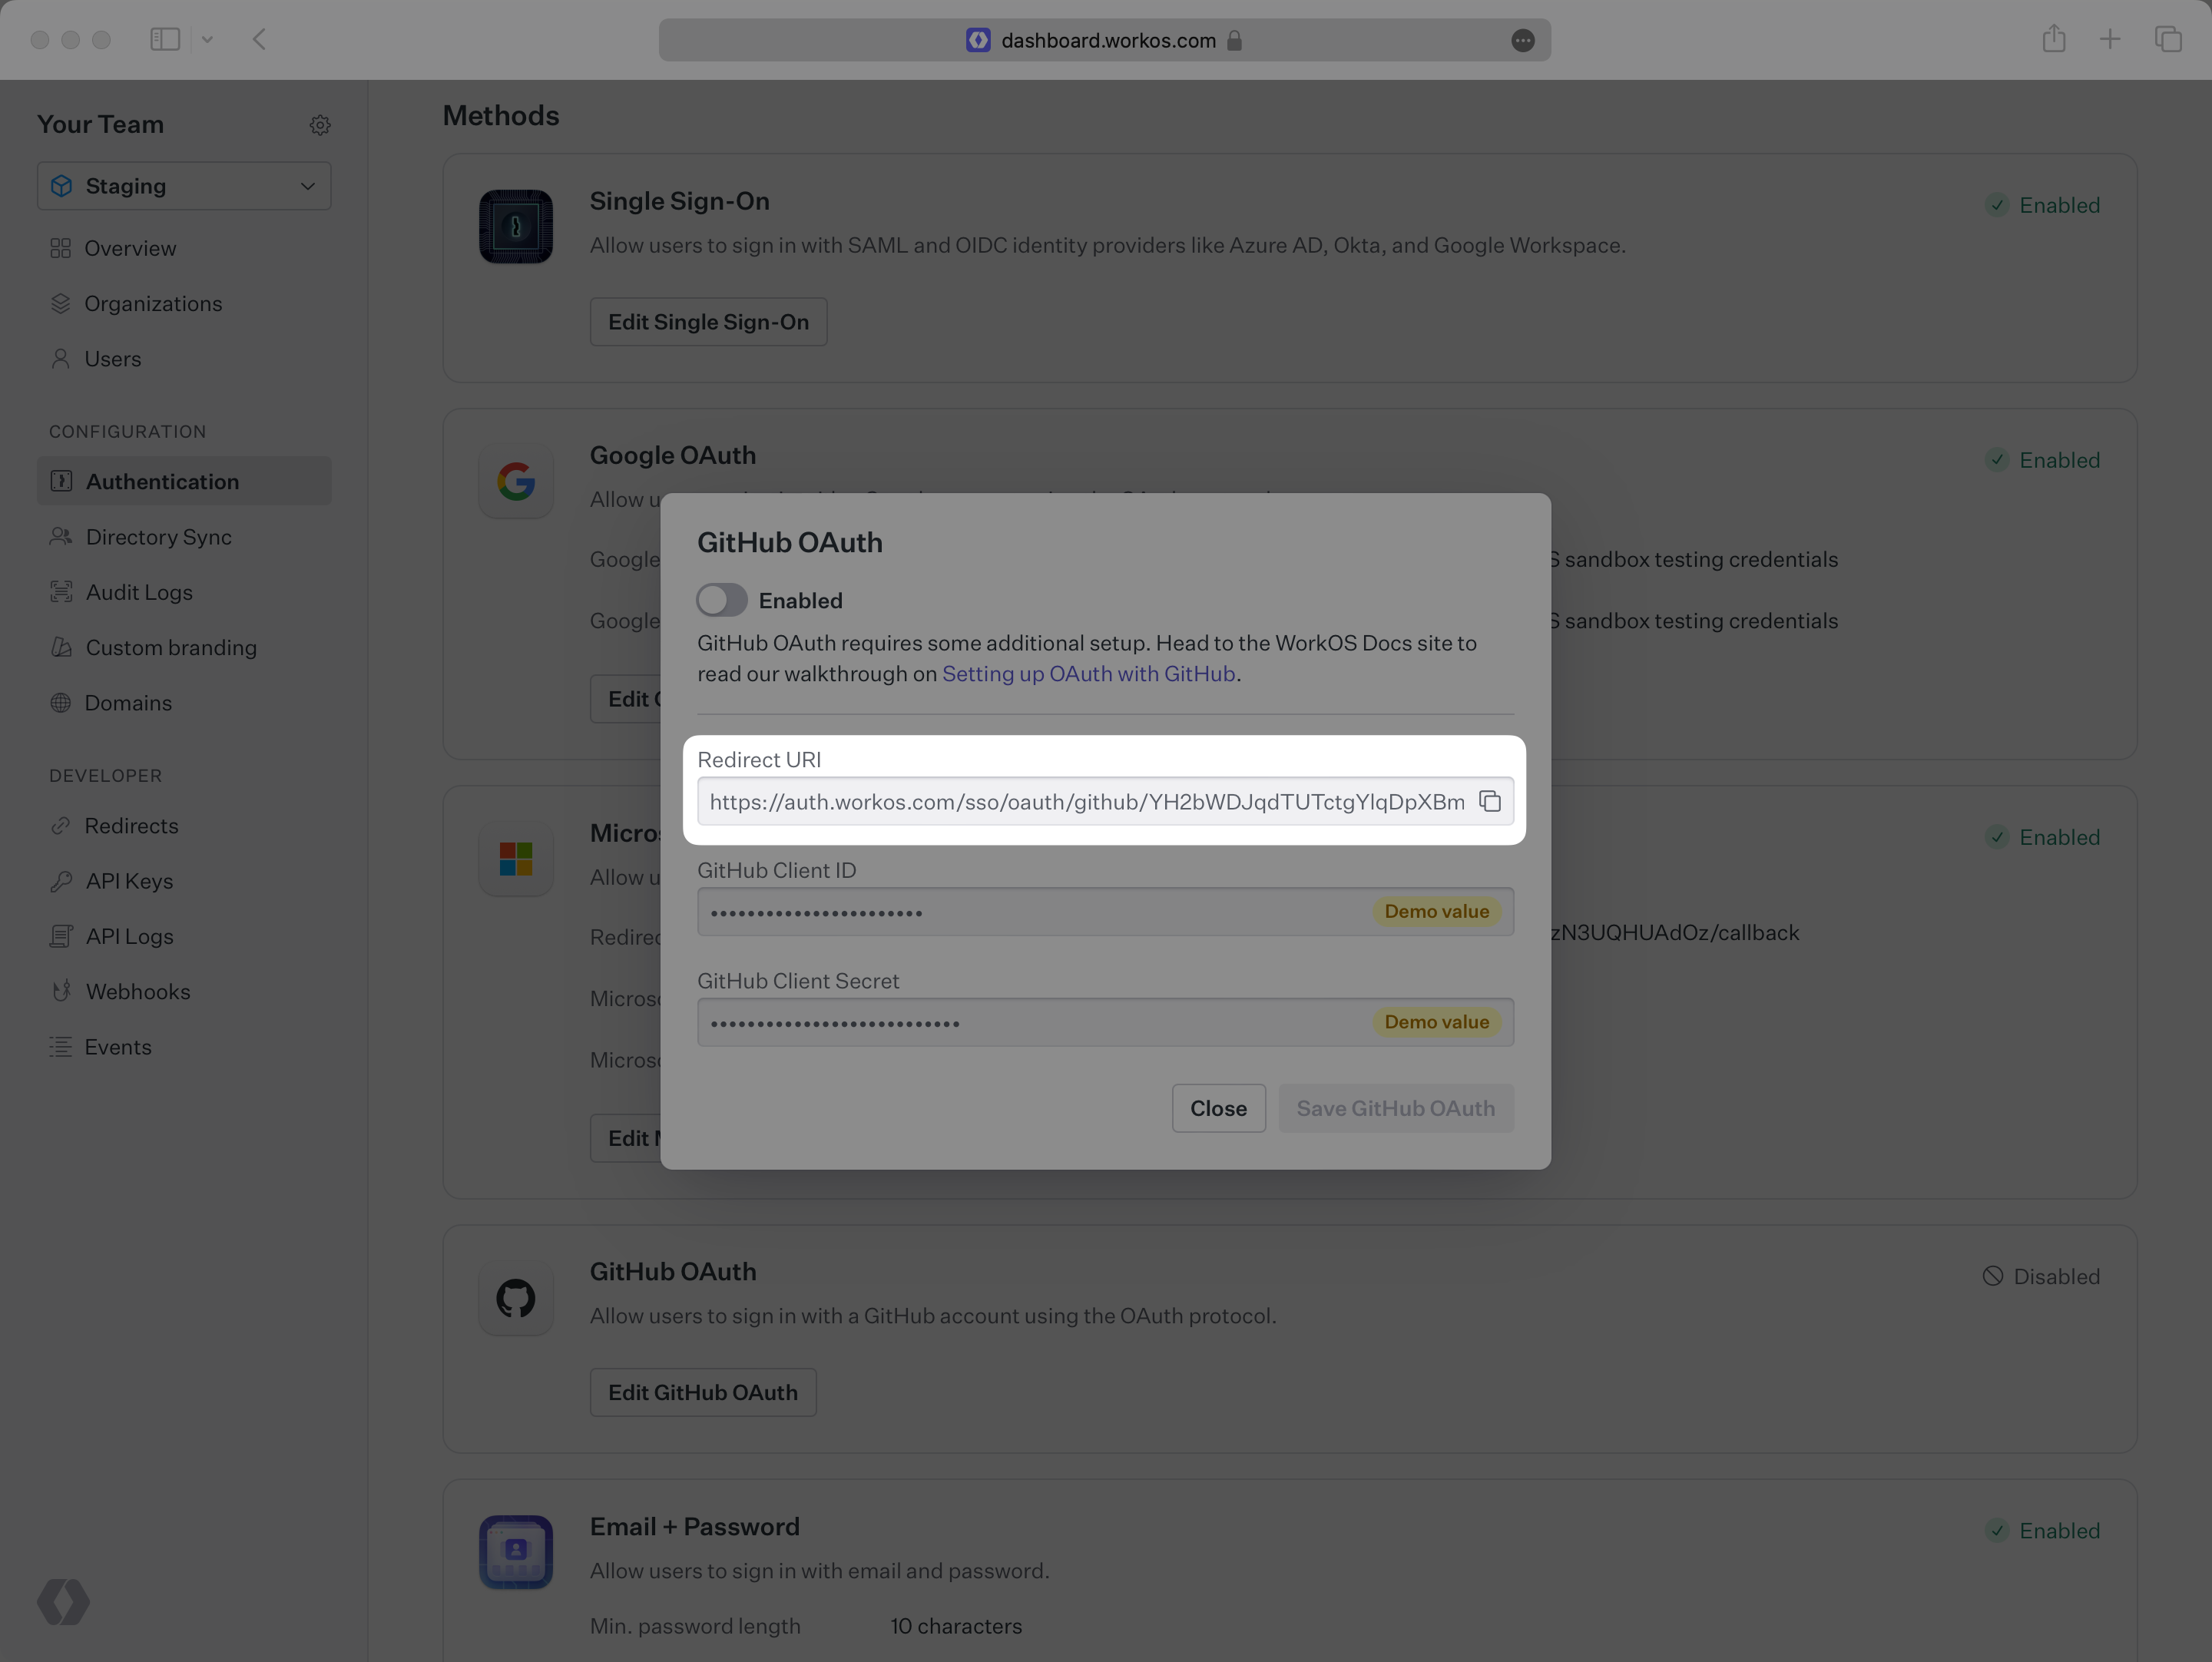 A screenshot showing the GitHub OAuth configuration modal in the WorkOS Dashboard.